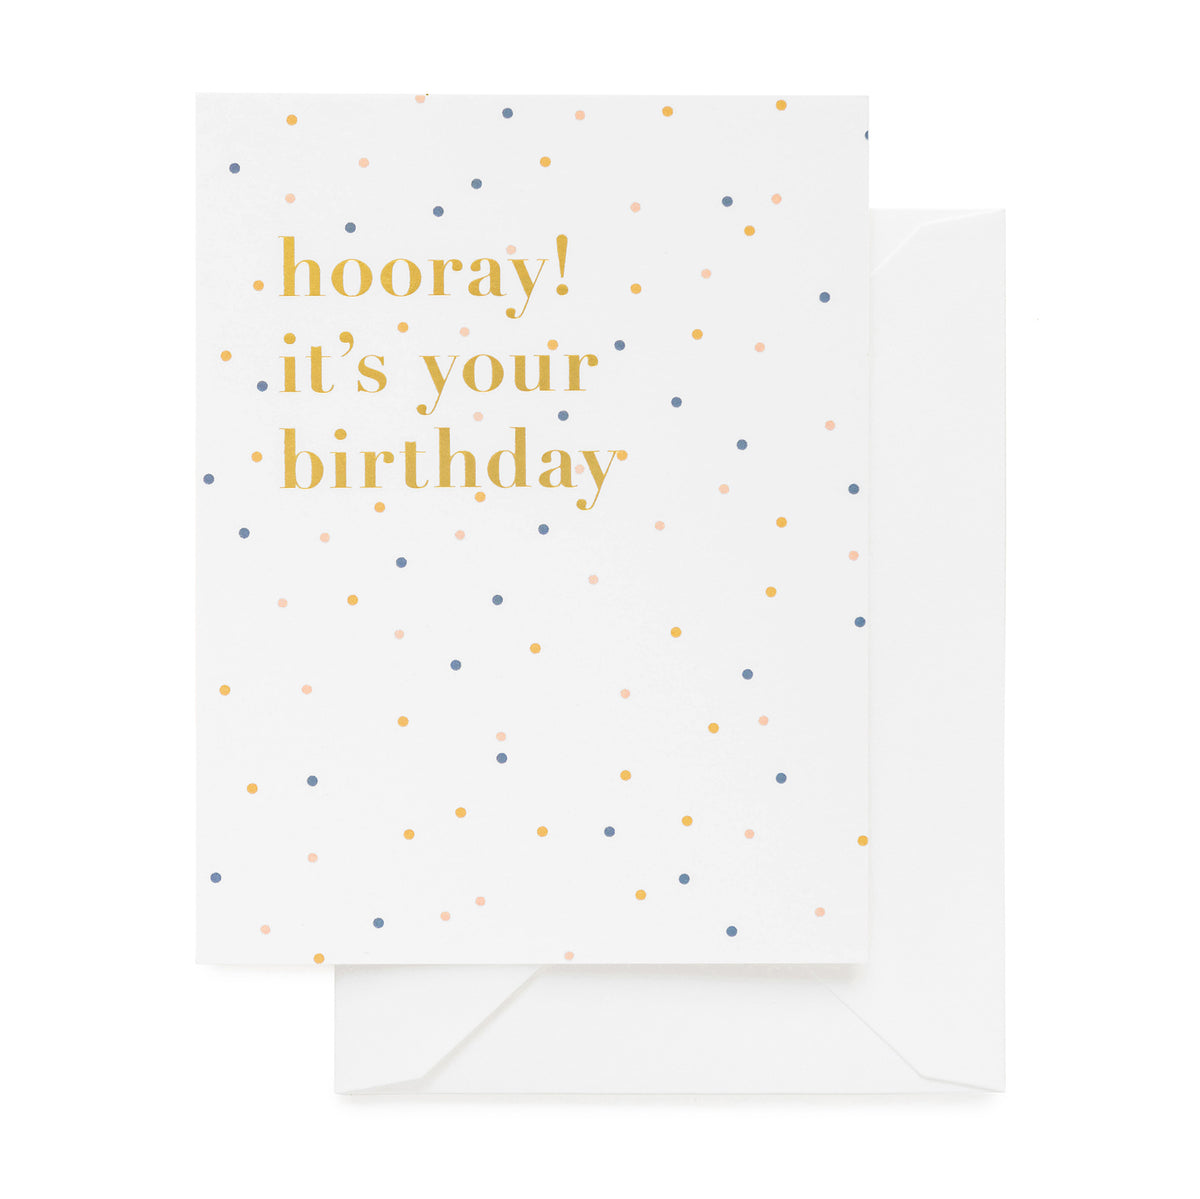 Gold foil hooray it's your birthday with colorful polka dot pattern